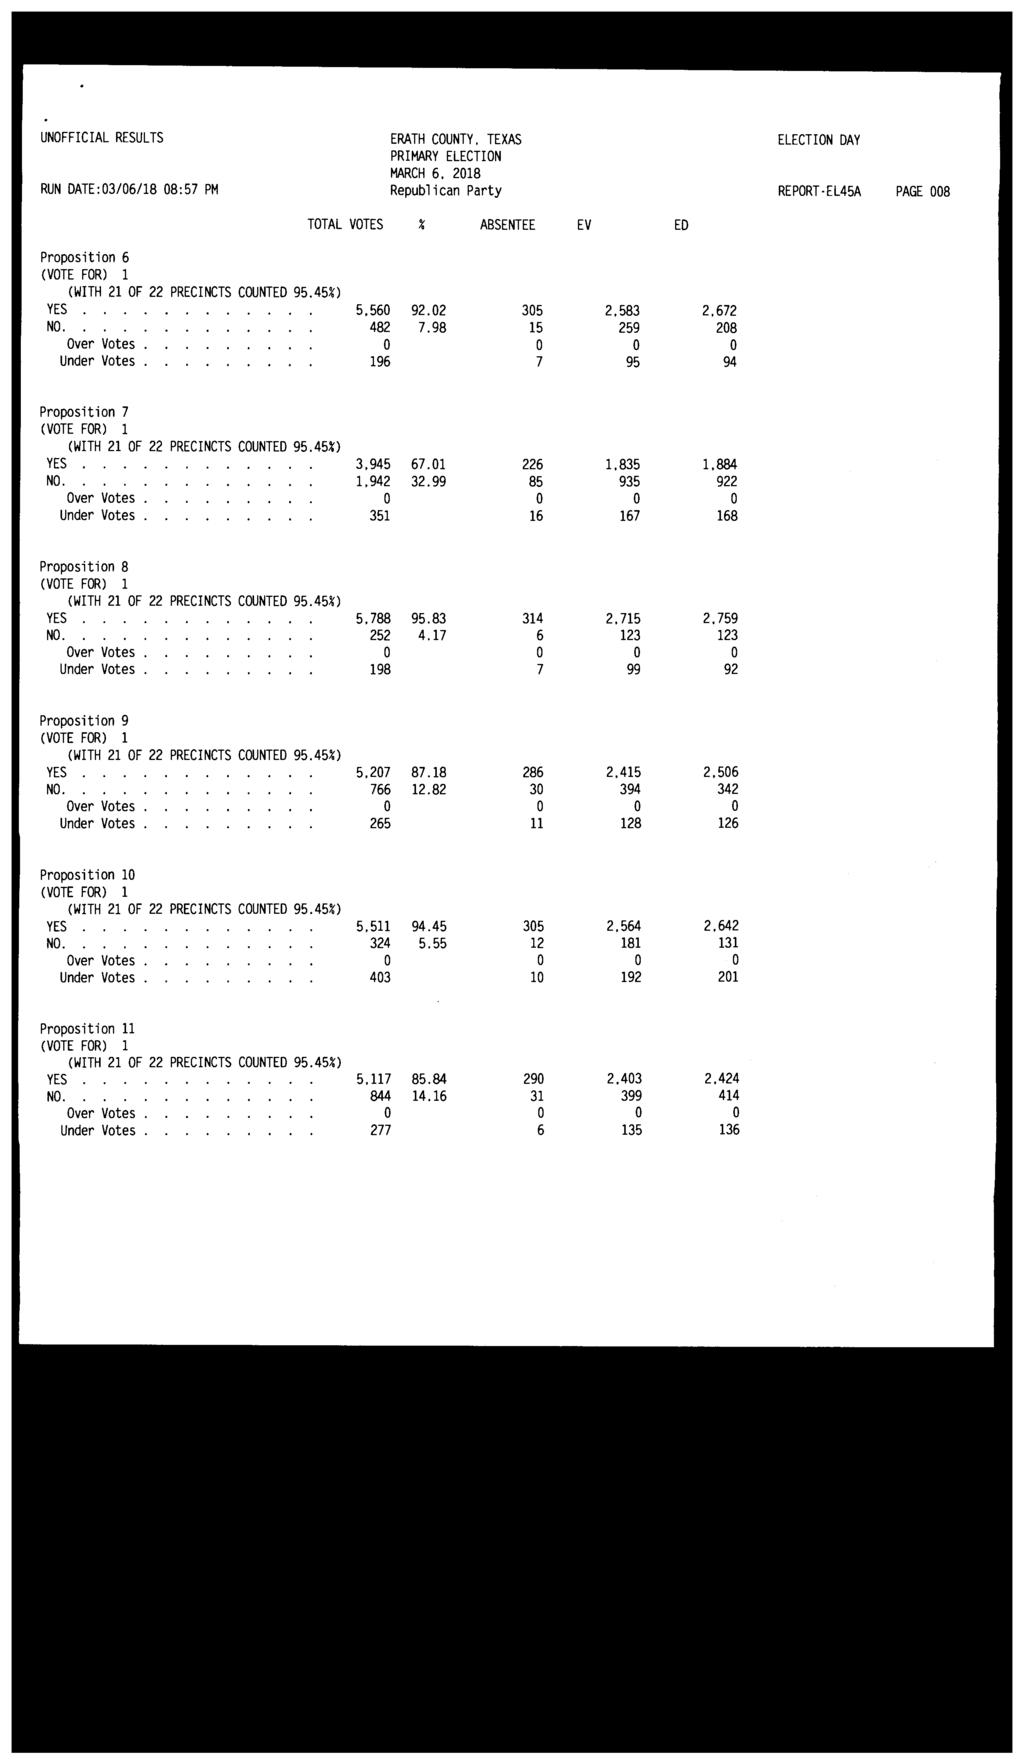 UNOFFICIAL RESULTS ERATH COUNTY. TEXAS ELECTION DAY RUN DATE:03/06/18 08:57 PM Republican Party REPORT-EL45A PAGE 008 Proposition 6 YES 5,560 92.02 305 2.583 2,672 NO. 482 7.